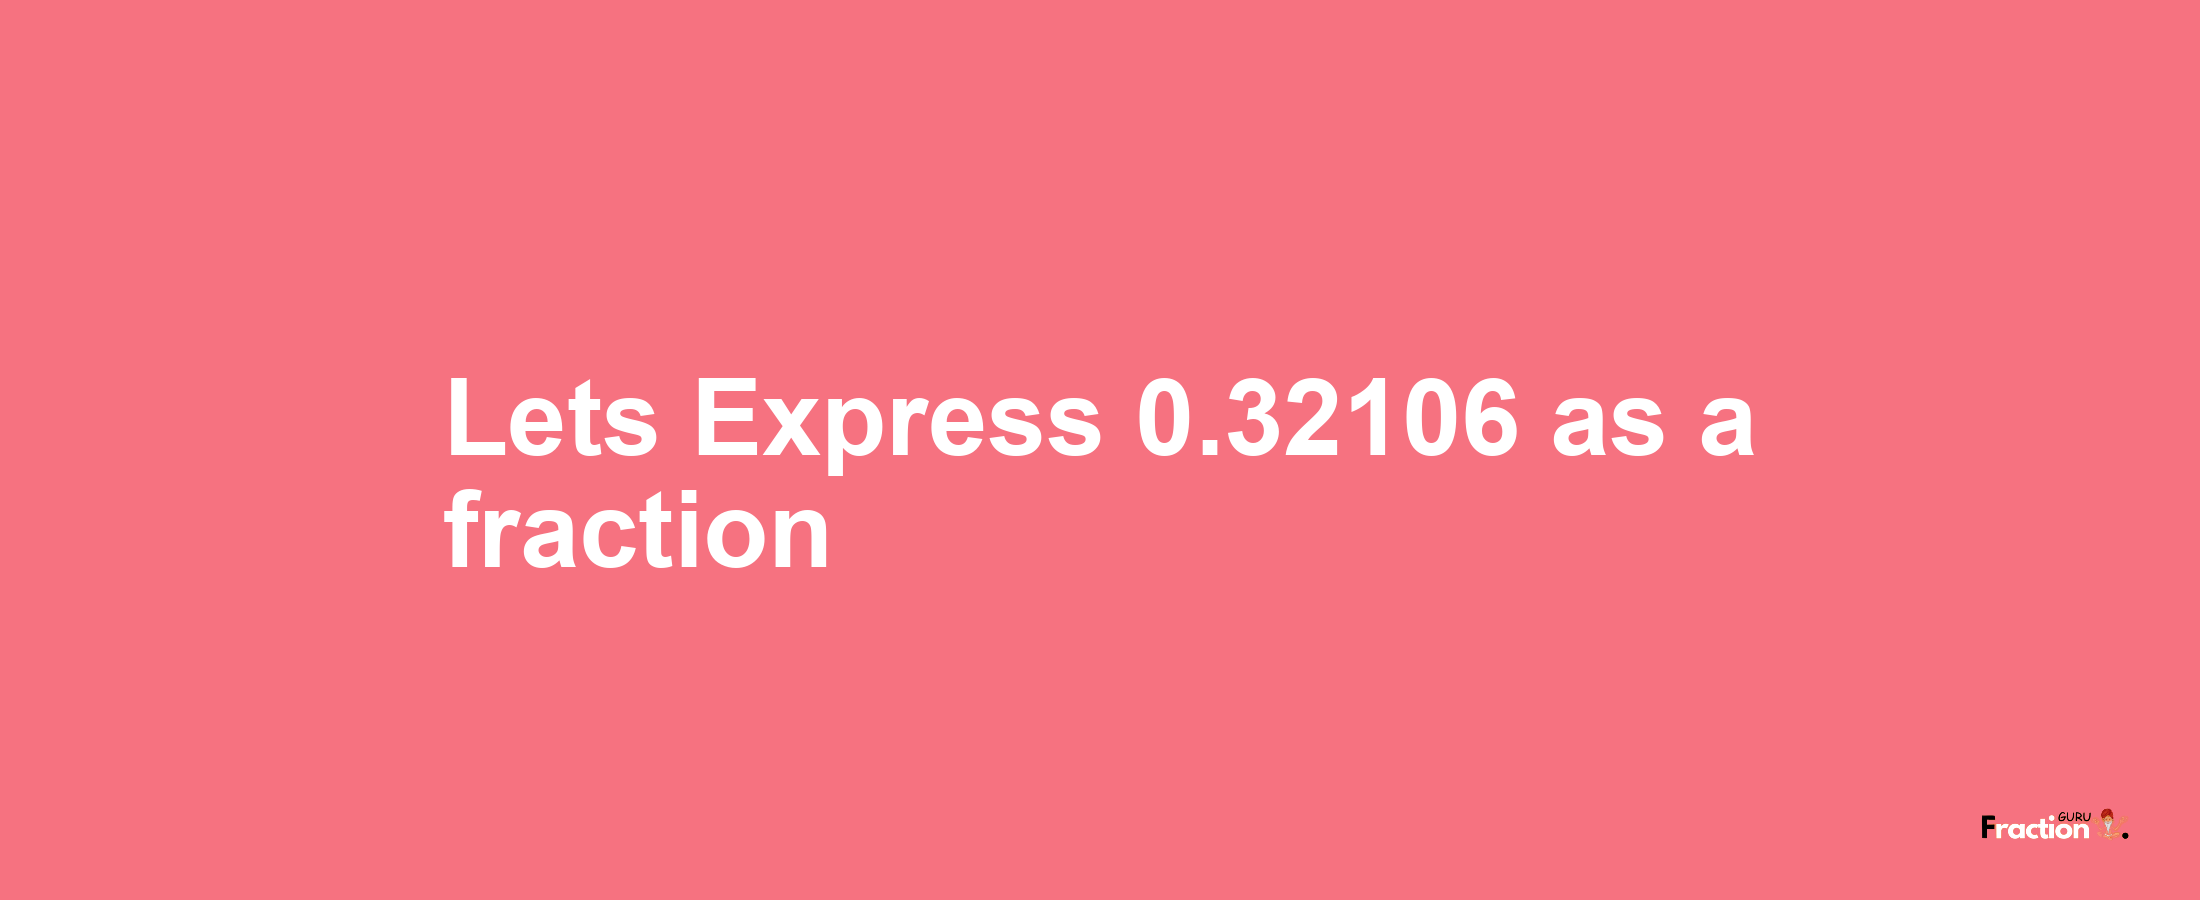 Lets Express 0.32106 as afraction